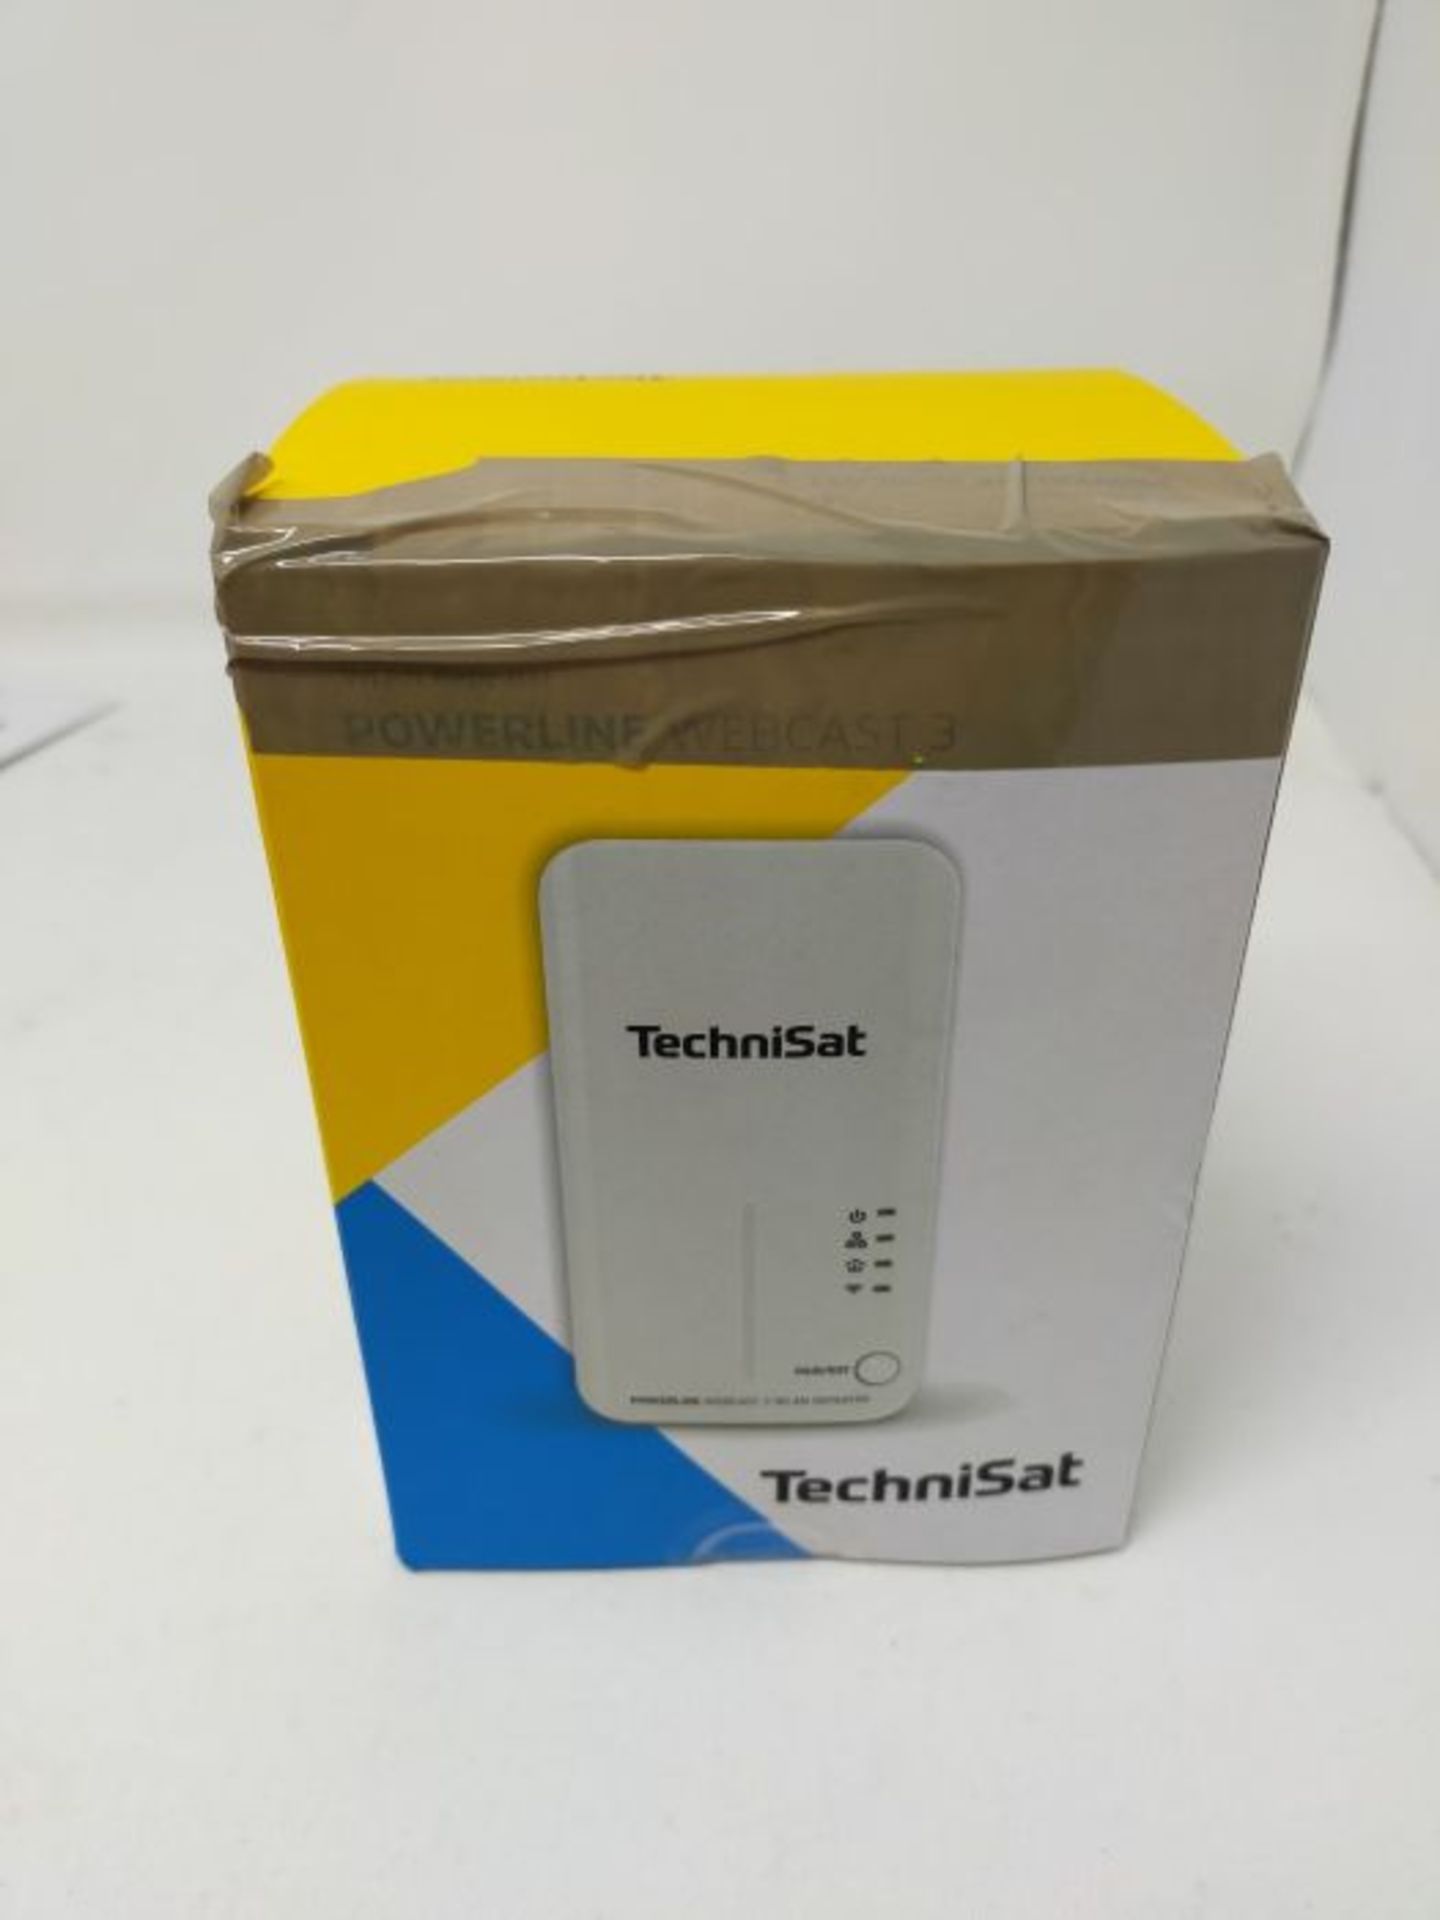 TechniSat Powerline WebCast 3 WLAN Repeater (to extend the range of existing WLAN netw - Image 2 of 3